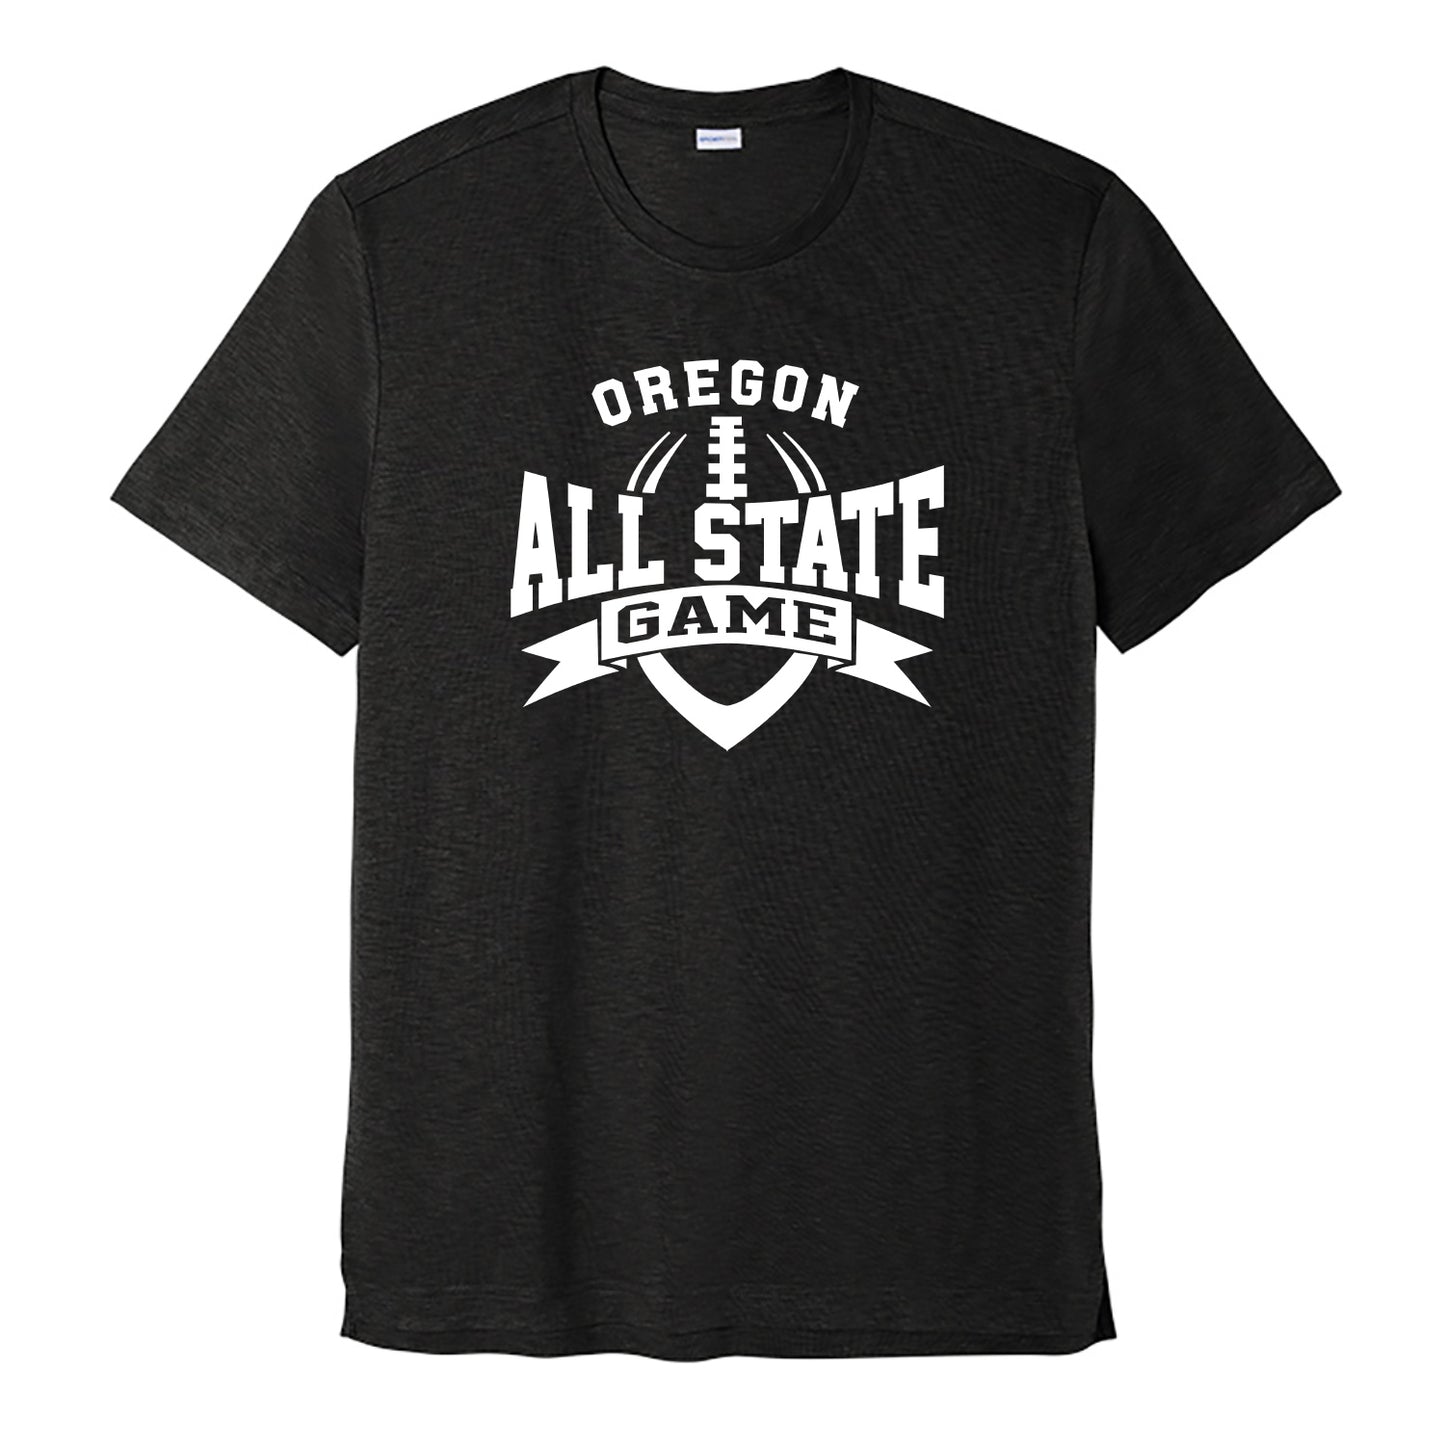 Oregon All State - Polyester Blend Tee - 4 colors available